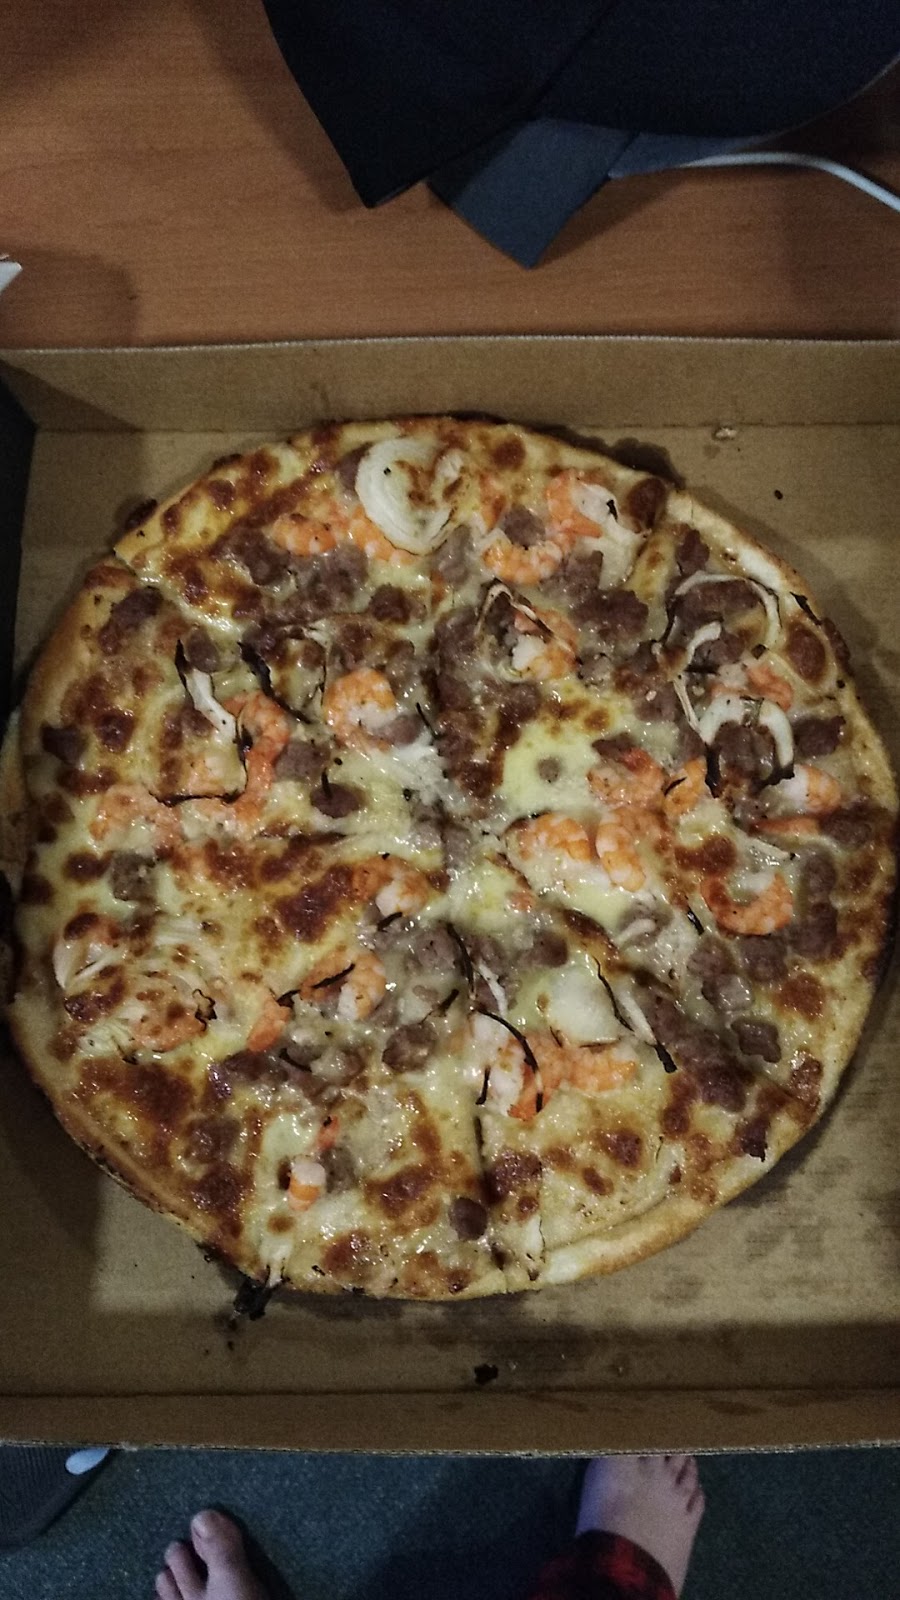 Sharkys Pizza Shack | meal delivery | 1/38 Donald St, Nelson Bay NSW 2315, Australia | 0249849599 OR +61 2 4984 9599